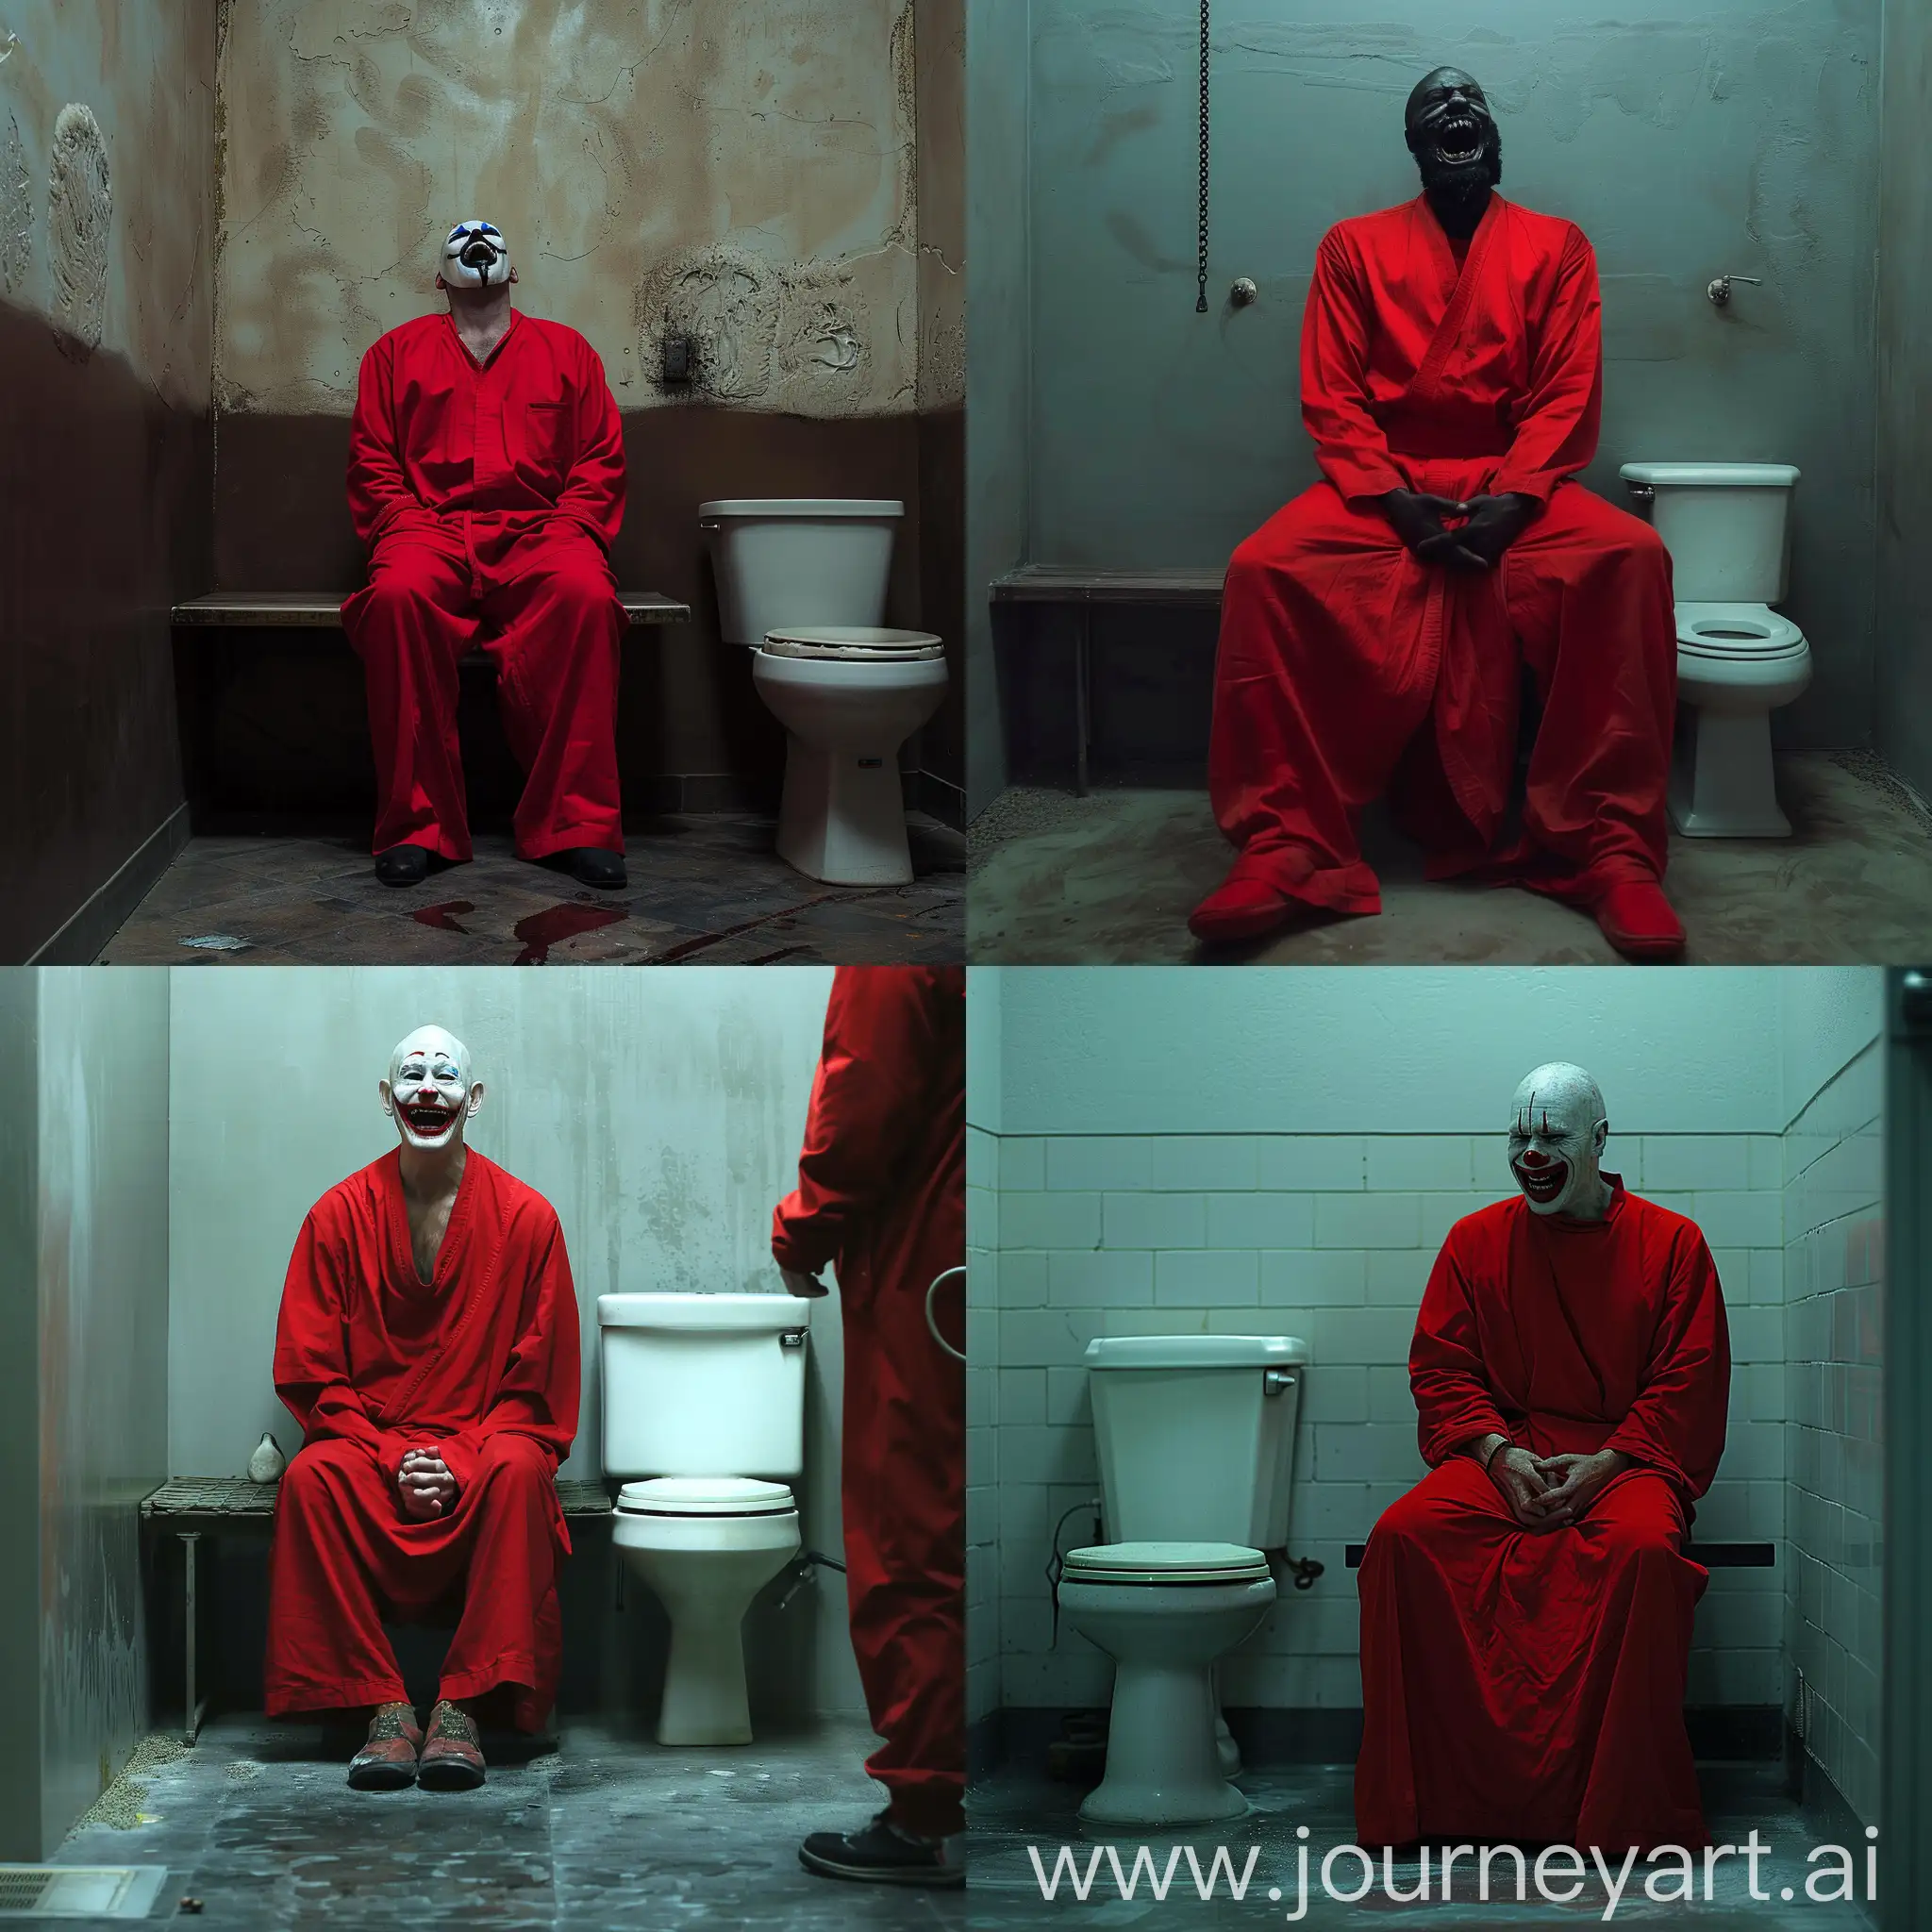 a man in a red robe sitting on a bench, mana blast, psychopath, vweto ii, meme template, full mask, manically laughing, leak, highlight scene of the movie, mantid features, the purge, dd, mango, funny and silly, toilet, watermarked, laughing and joking